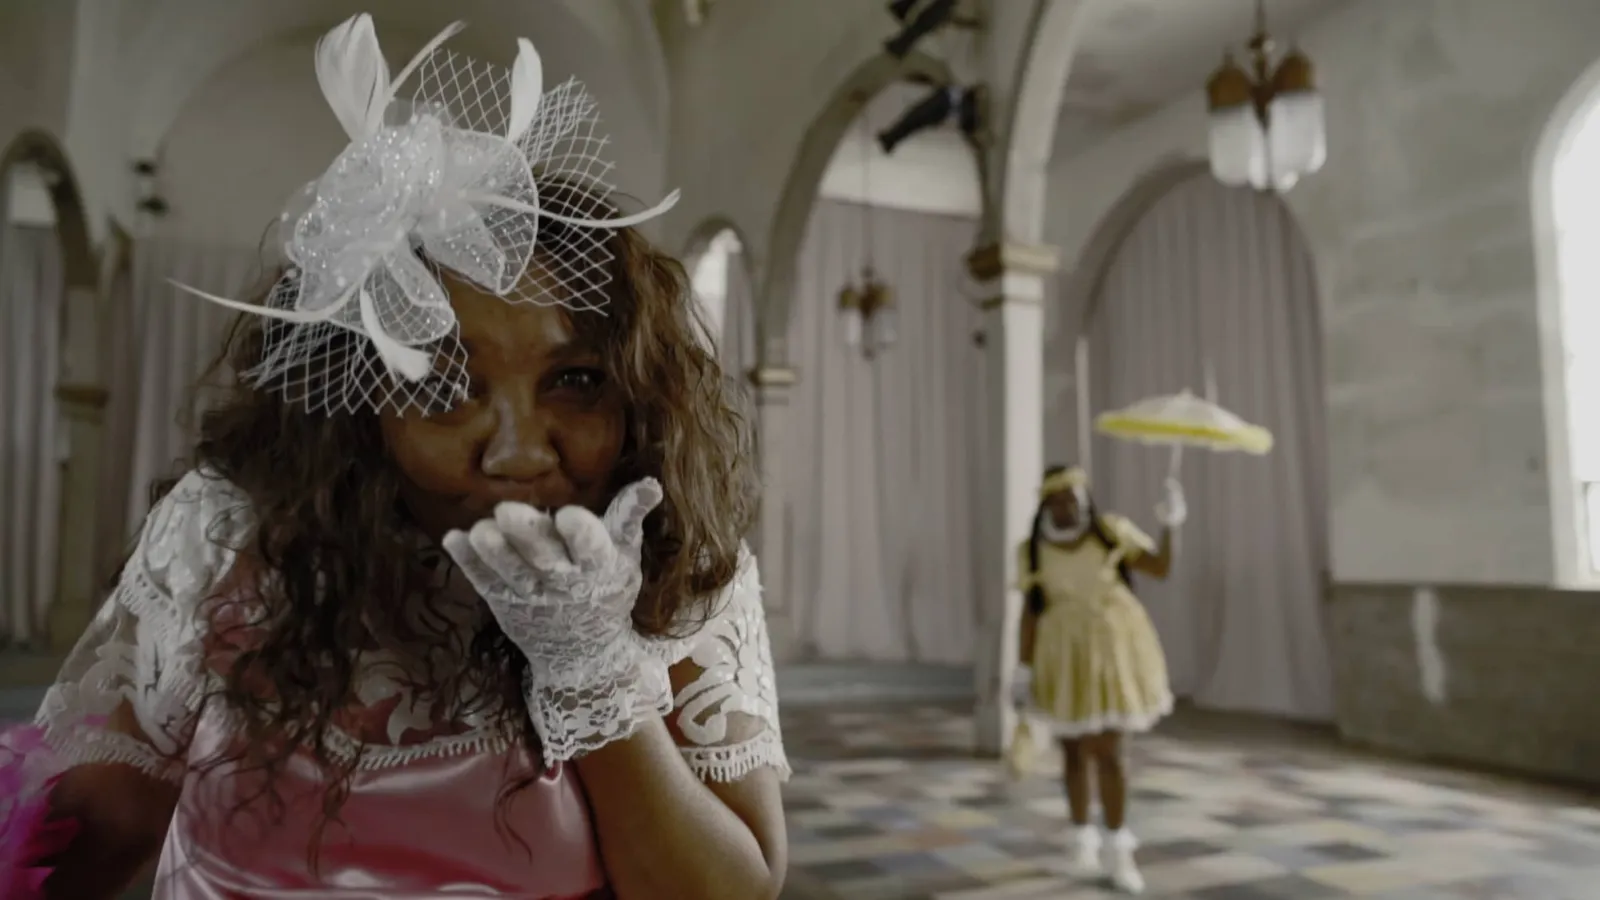 A black woman blows a kiss to the camera wearing a white lace dress with matching hat and gloves. Behind her is another Black woman in a yellow dress holding a matching parisol.